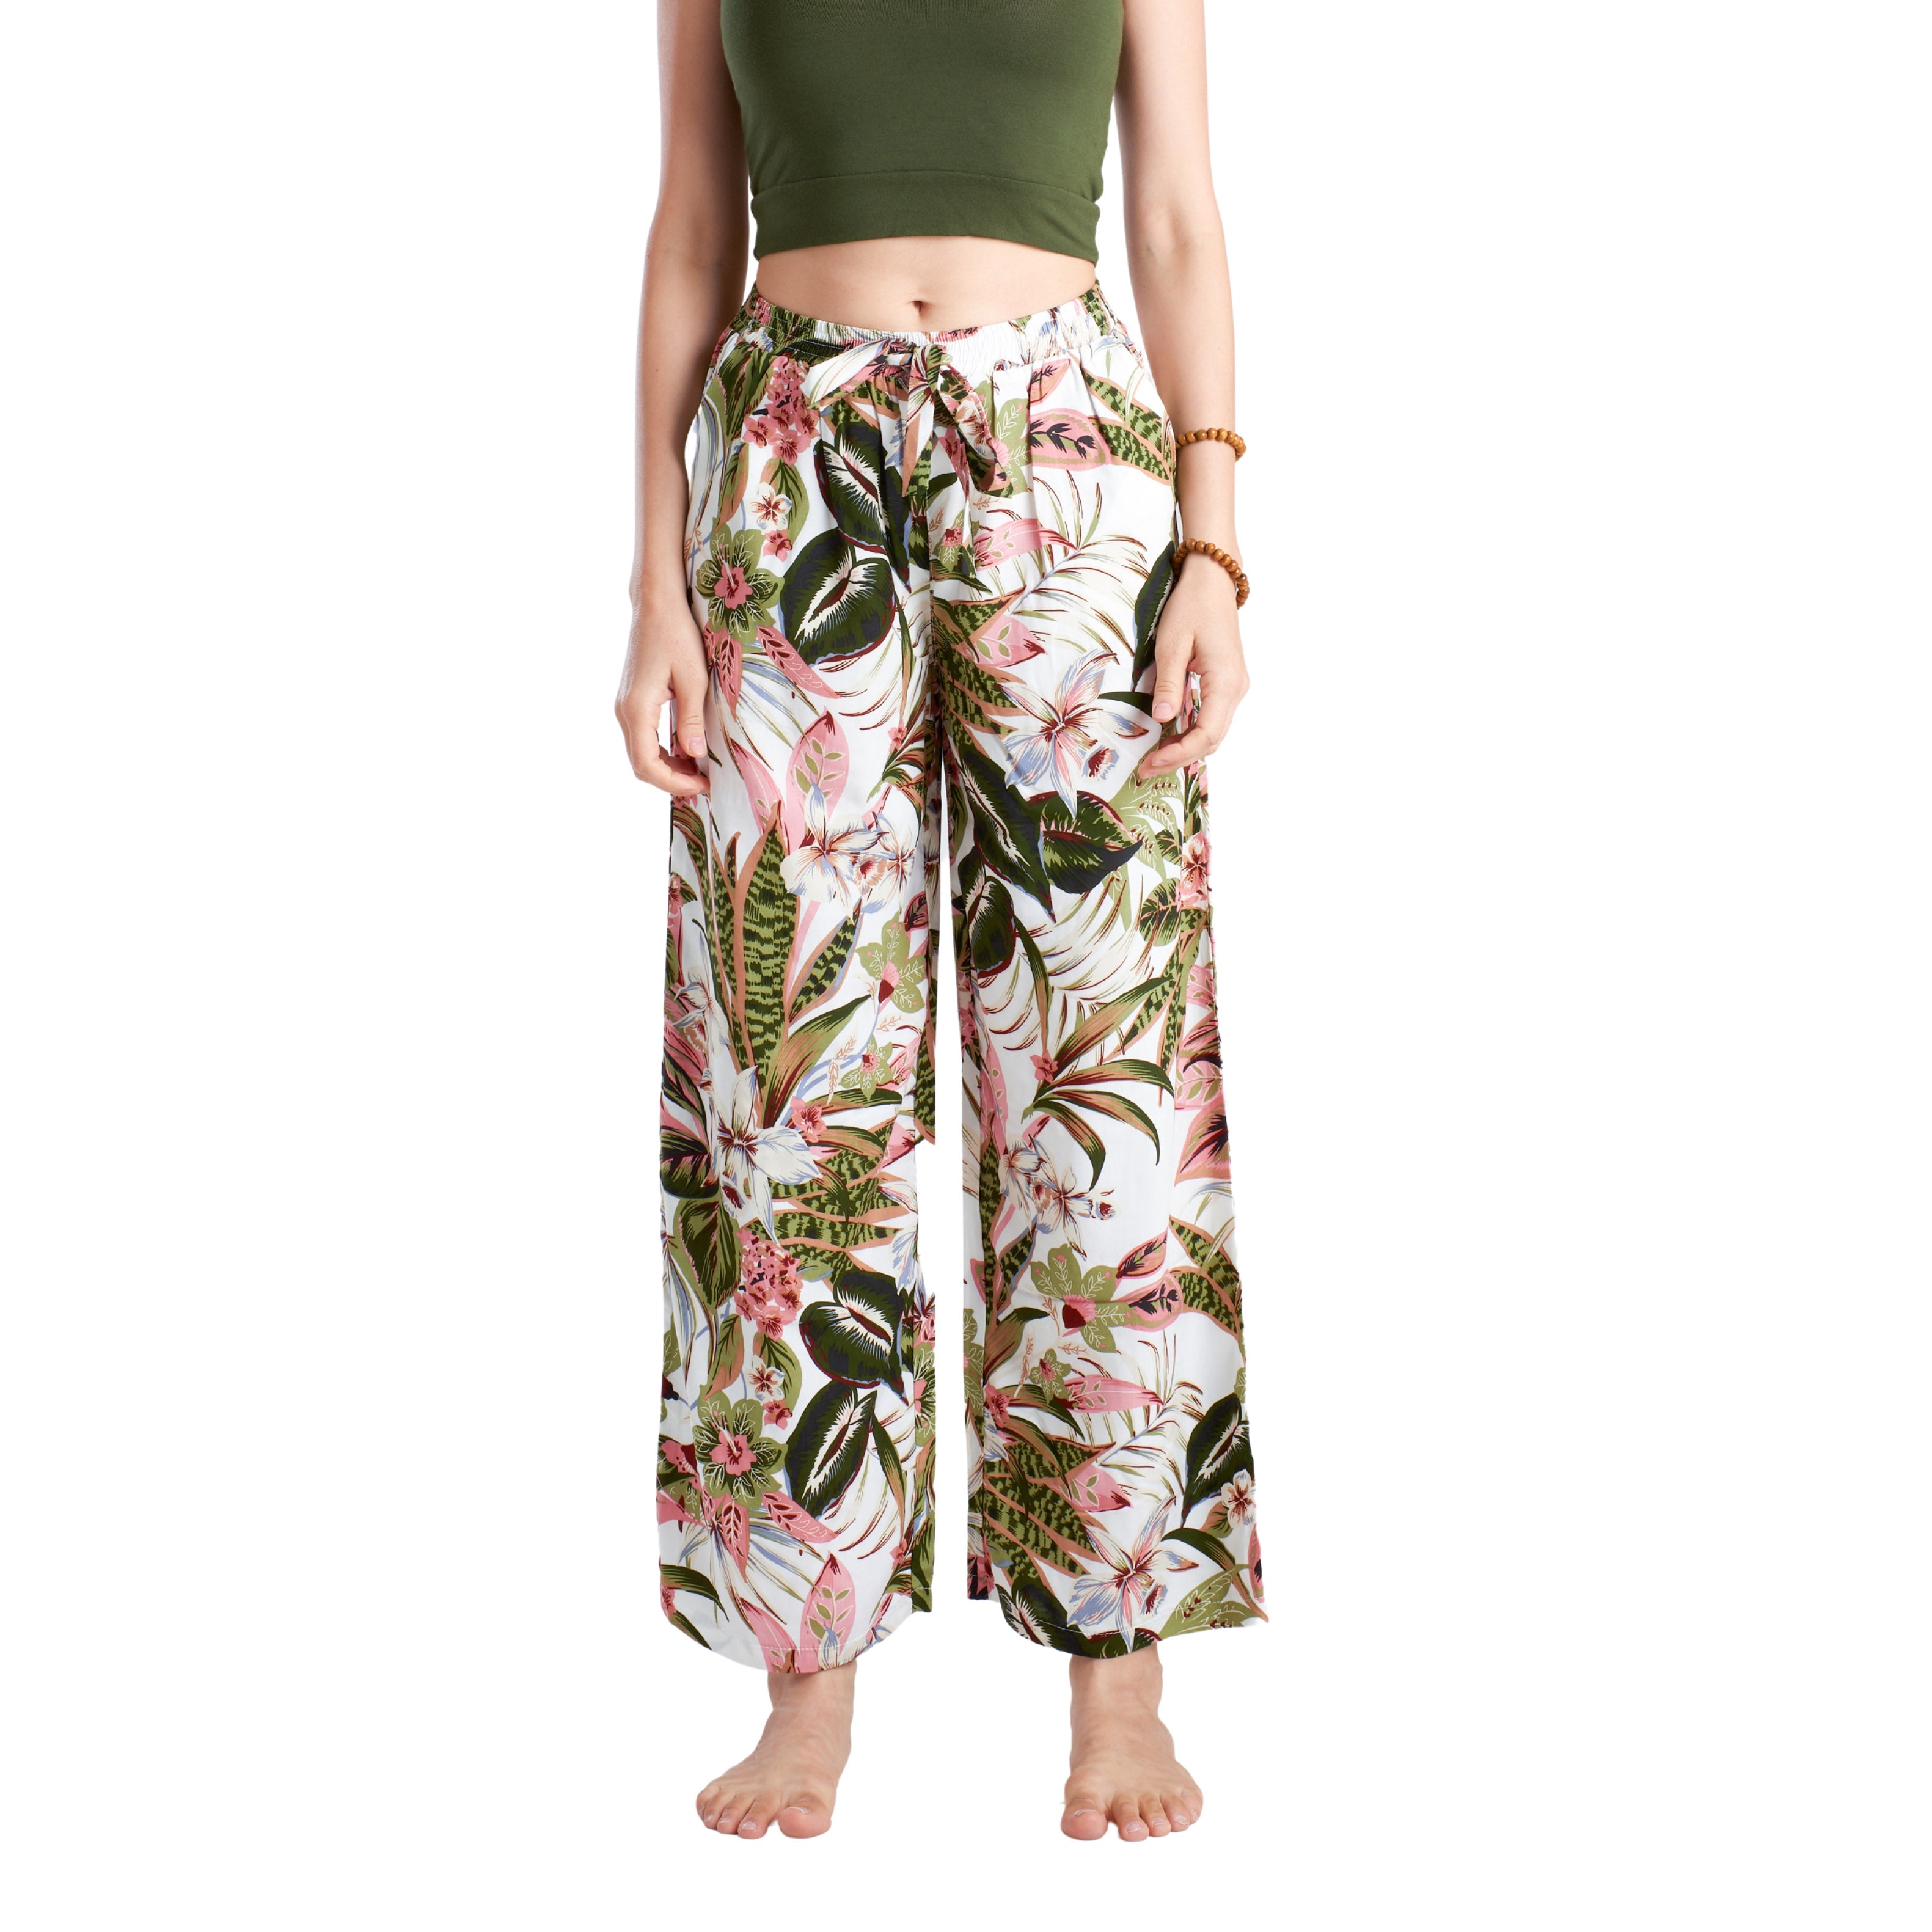 VENUS PANTS Elepanta Casual Pants - Buy Today Elephant Pants Jewelry And Bohemian Clothes Handmade In Thailand Help To Save The Elephants FairTrade And Vegan